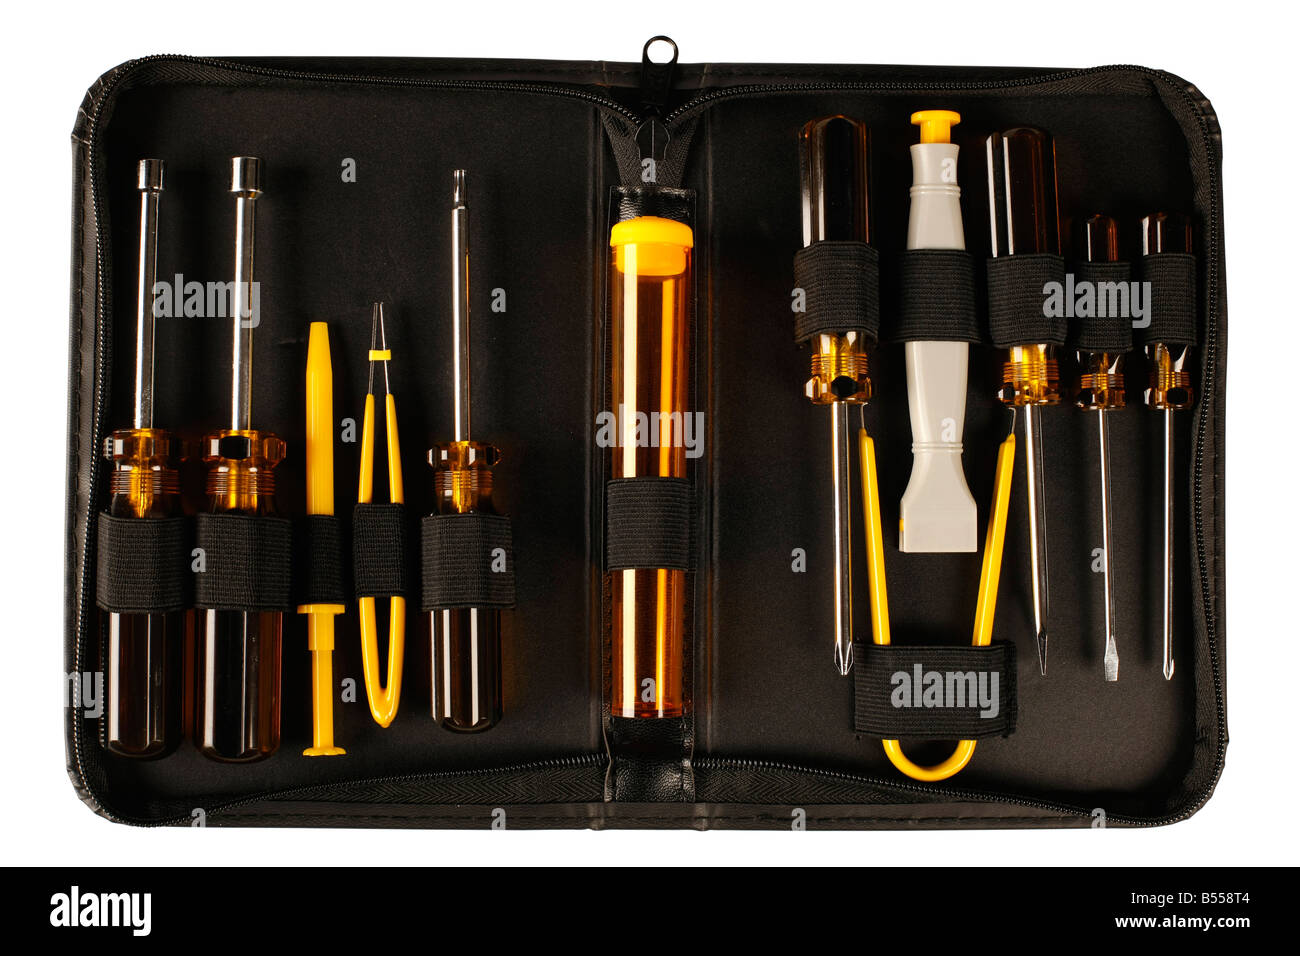 A open tool kit with screwdrivers and pliers and other items isolated on white with clipping paths Stock Photo